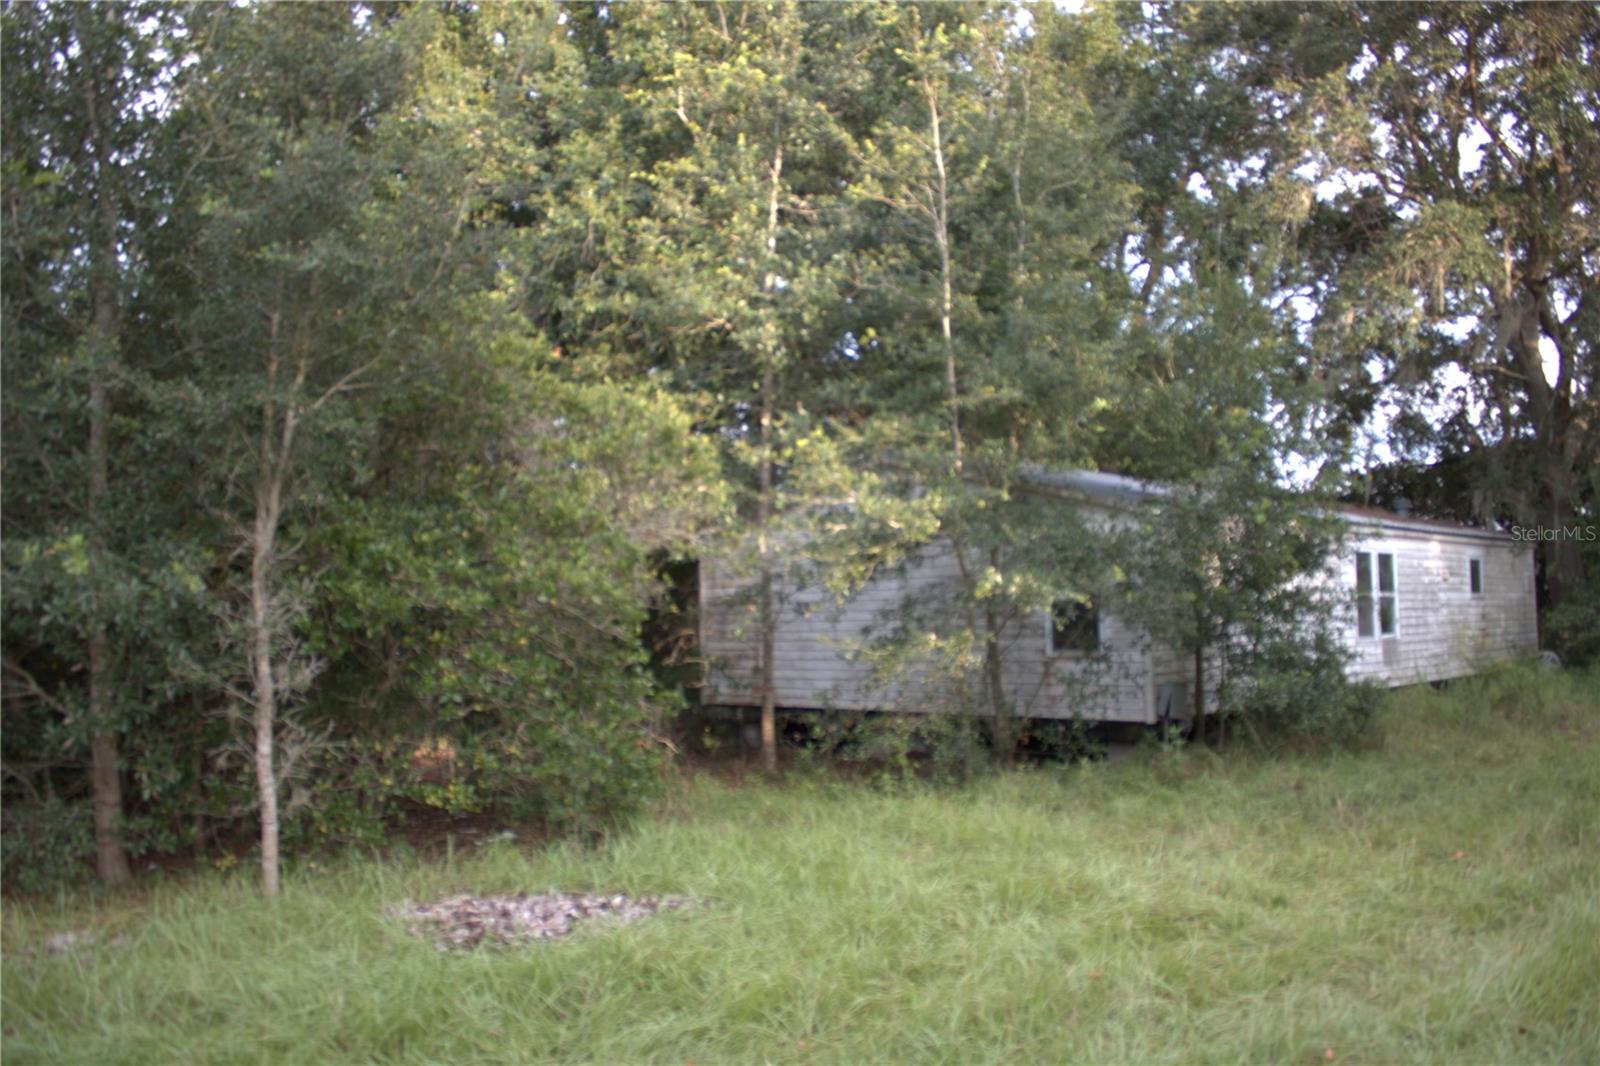 Photo of 25119 PUNKIN CENTER RD, HOWEY IN THE HILLS, FL 34737